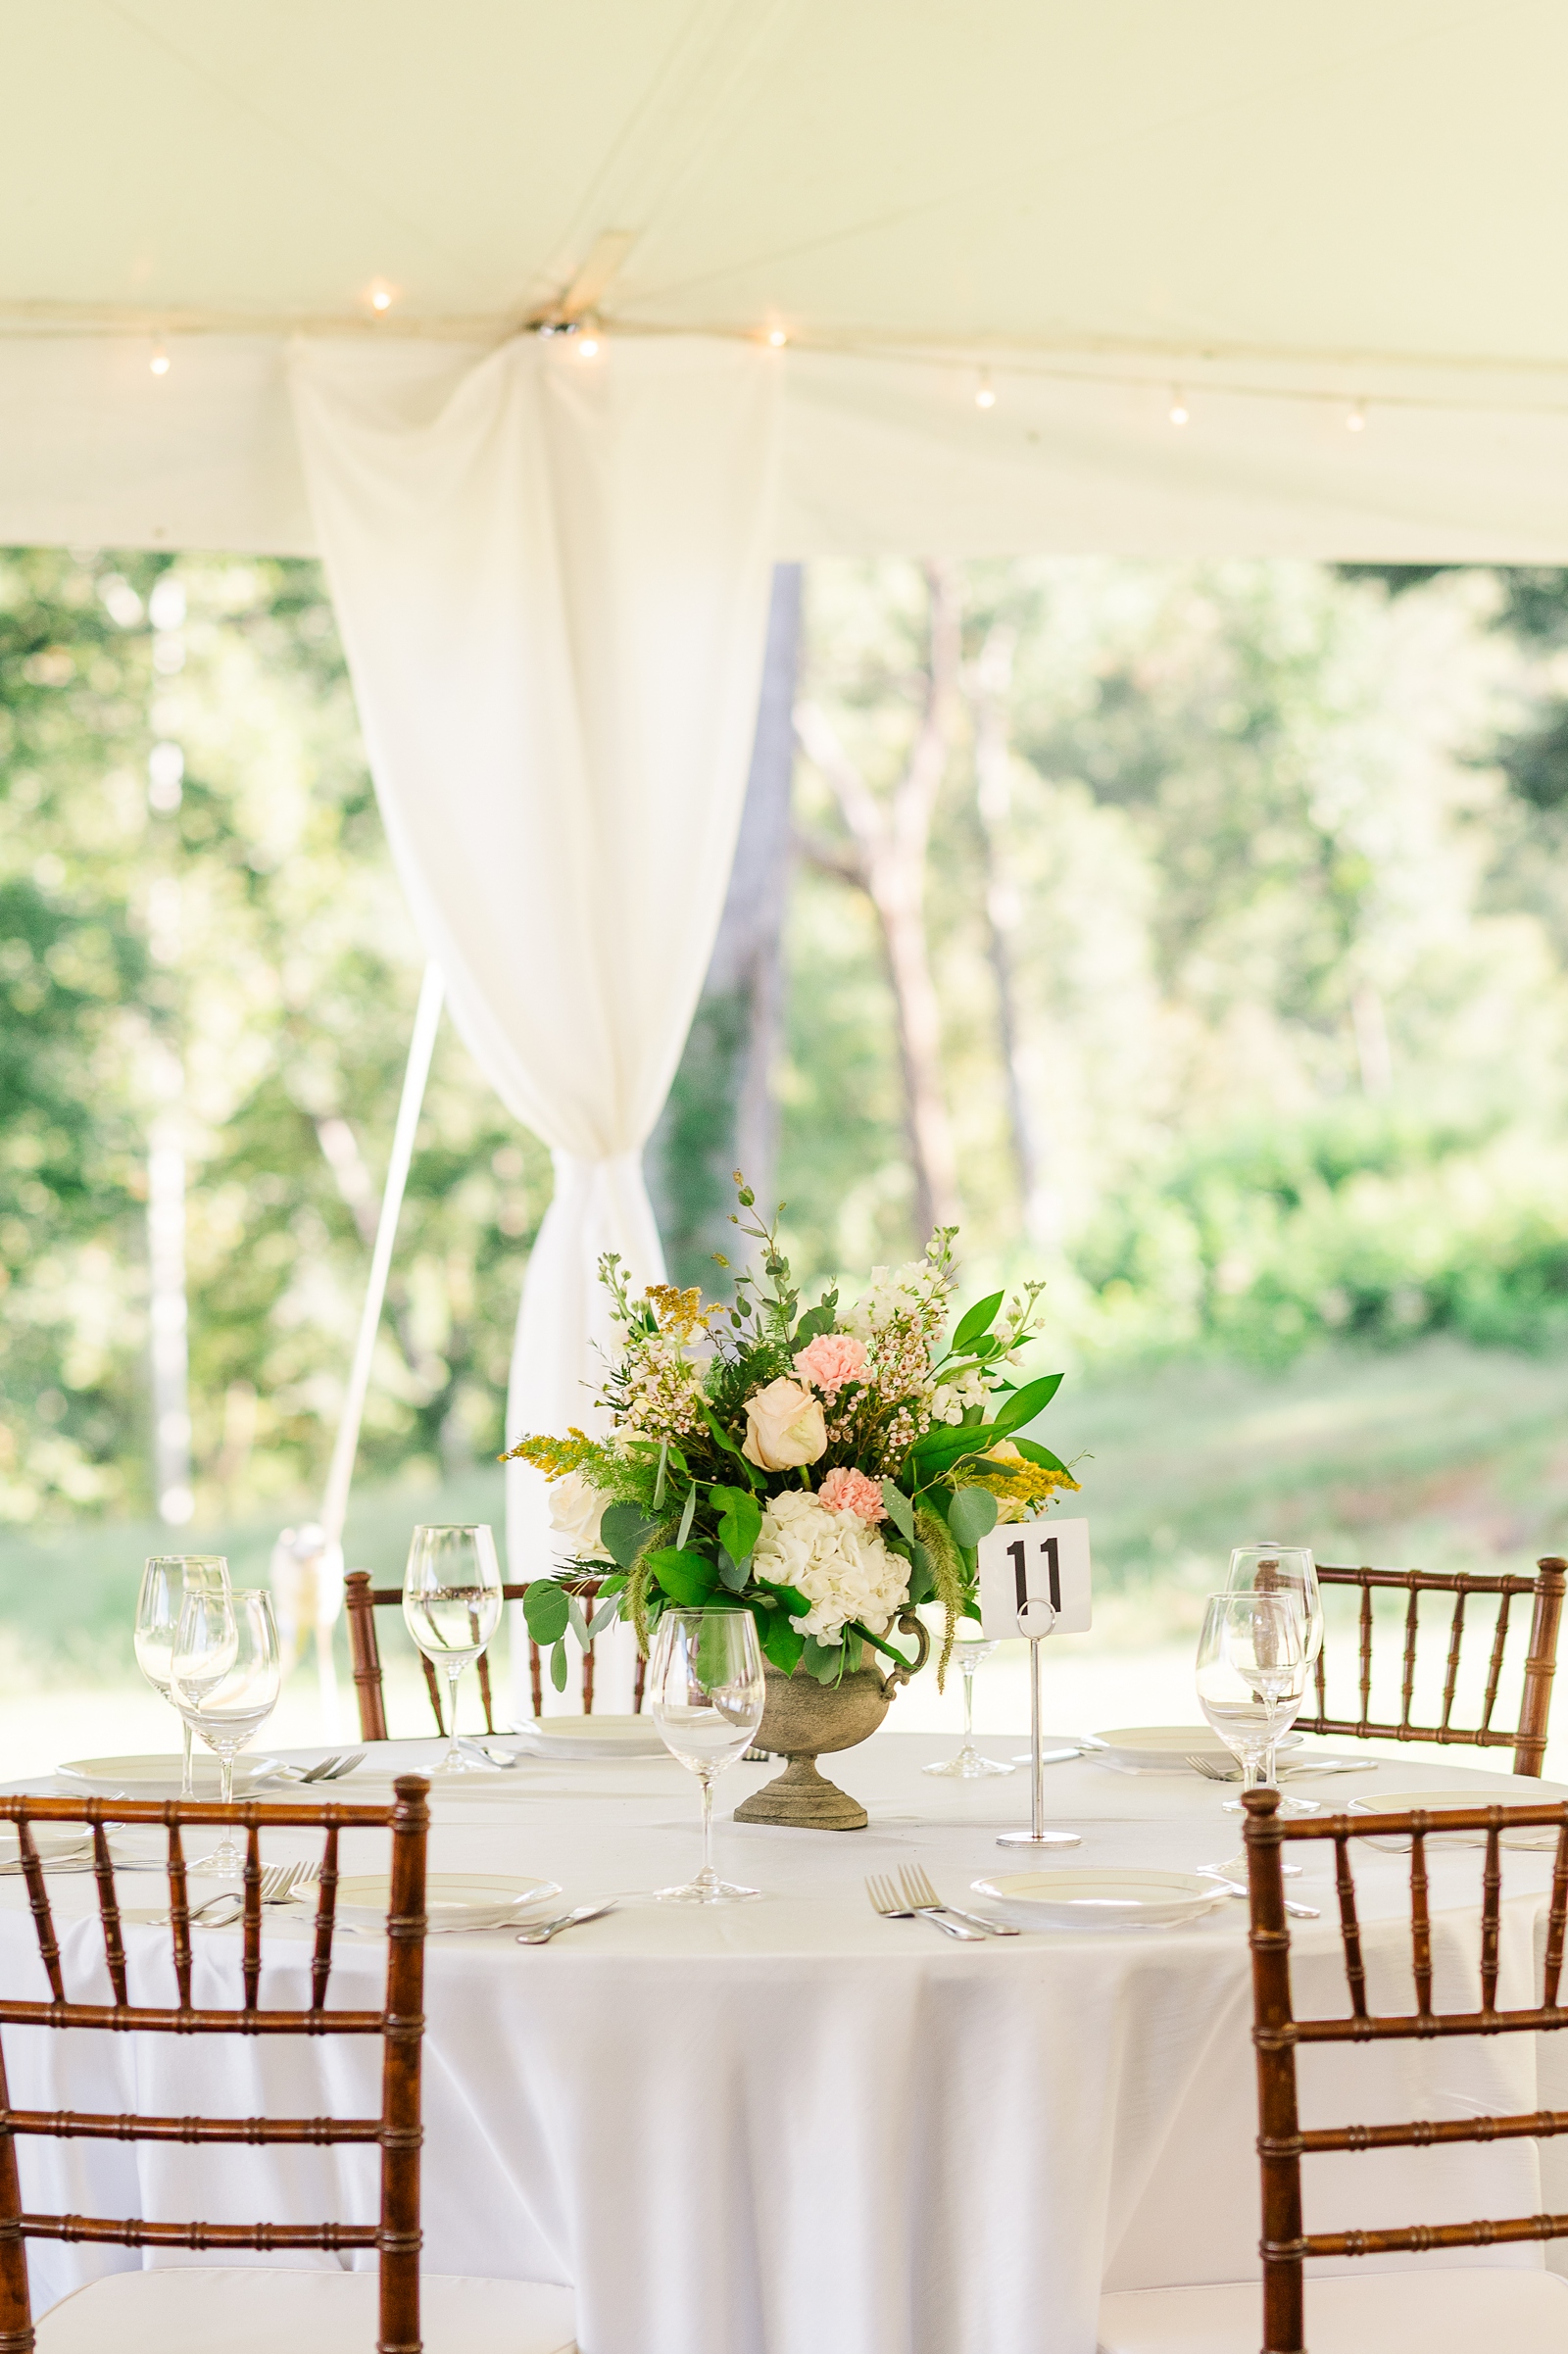 Elegant Reception Decor for Summer  Estate Wedding Reception. Photography by New Kent Wedding Photographer Kailey Brianne Photography. 